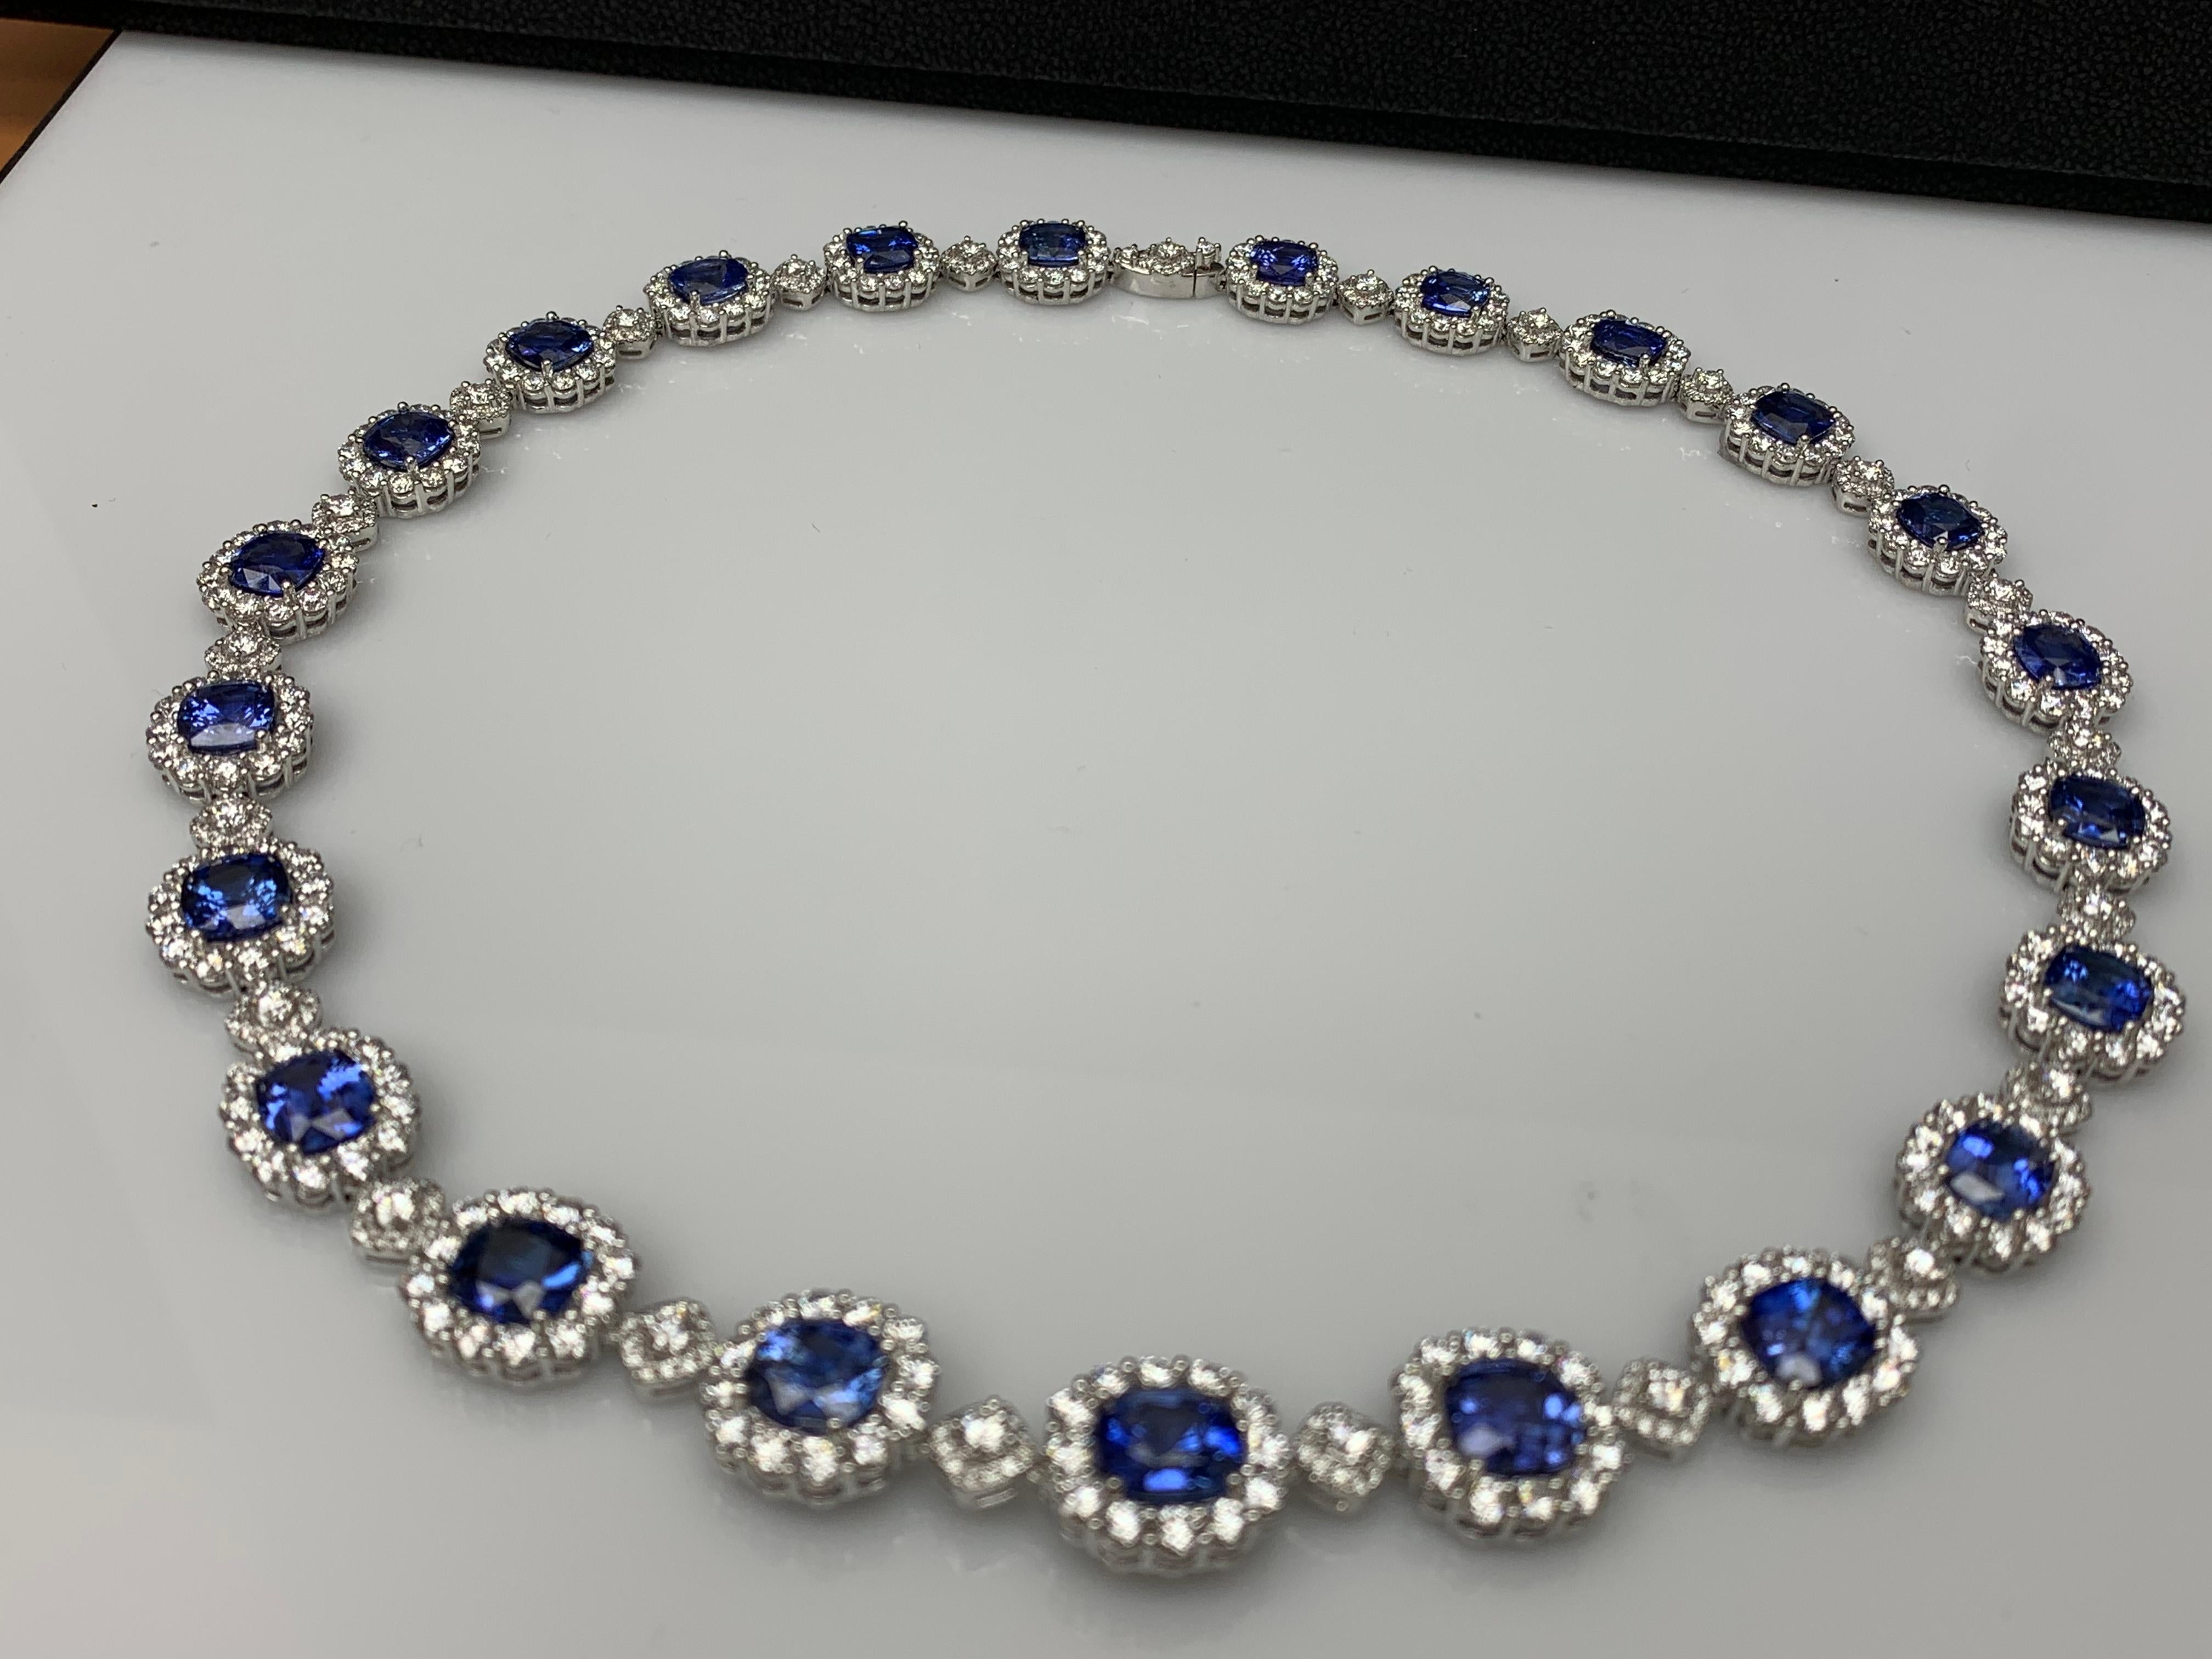 35.11 Carat Cushion Cut Blue Sapphire and Diamond Necklace in 18K White Gold For Sale 8